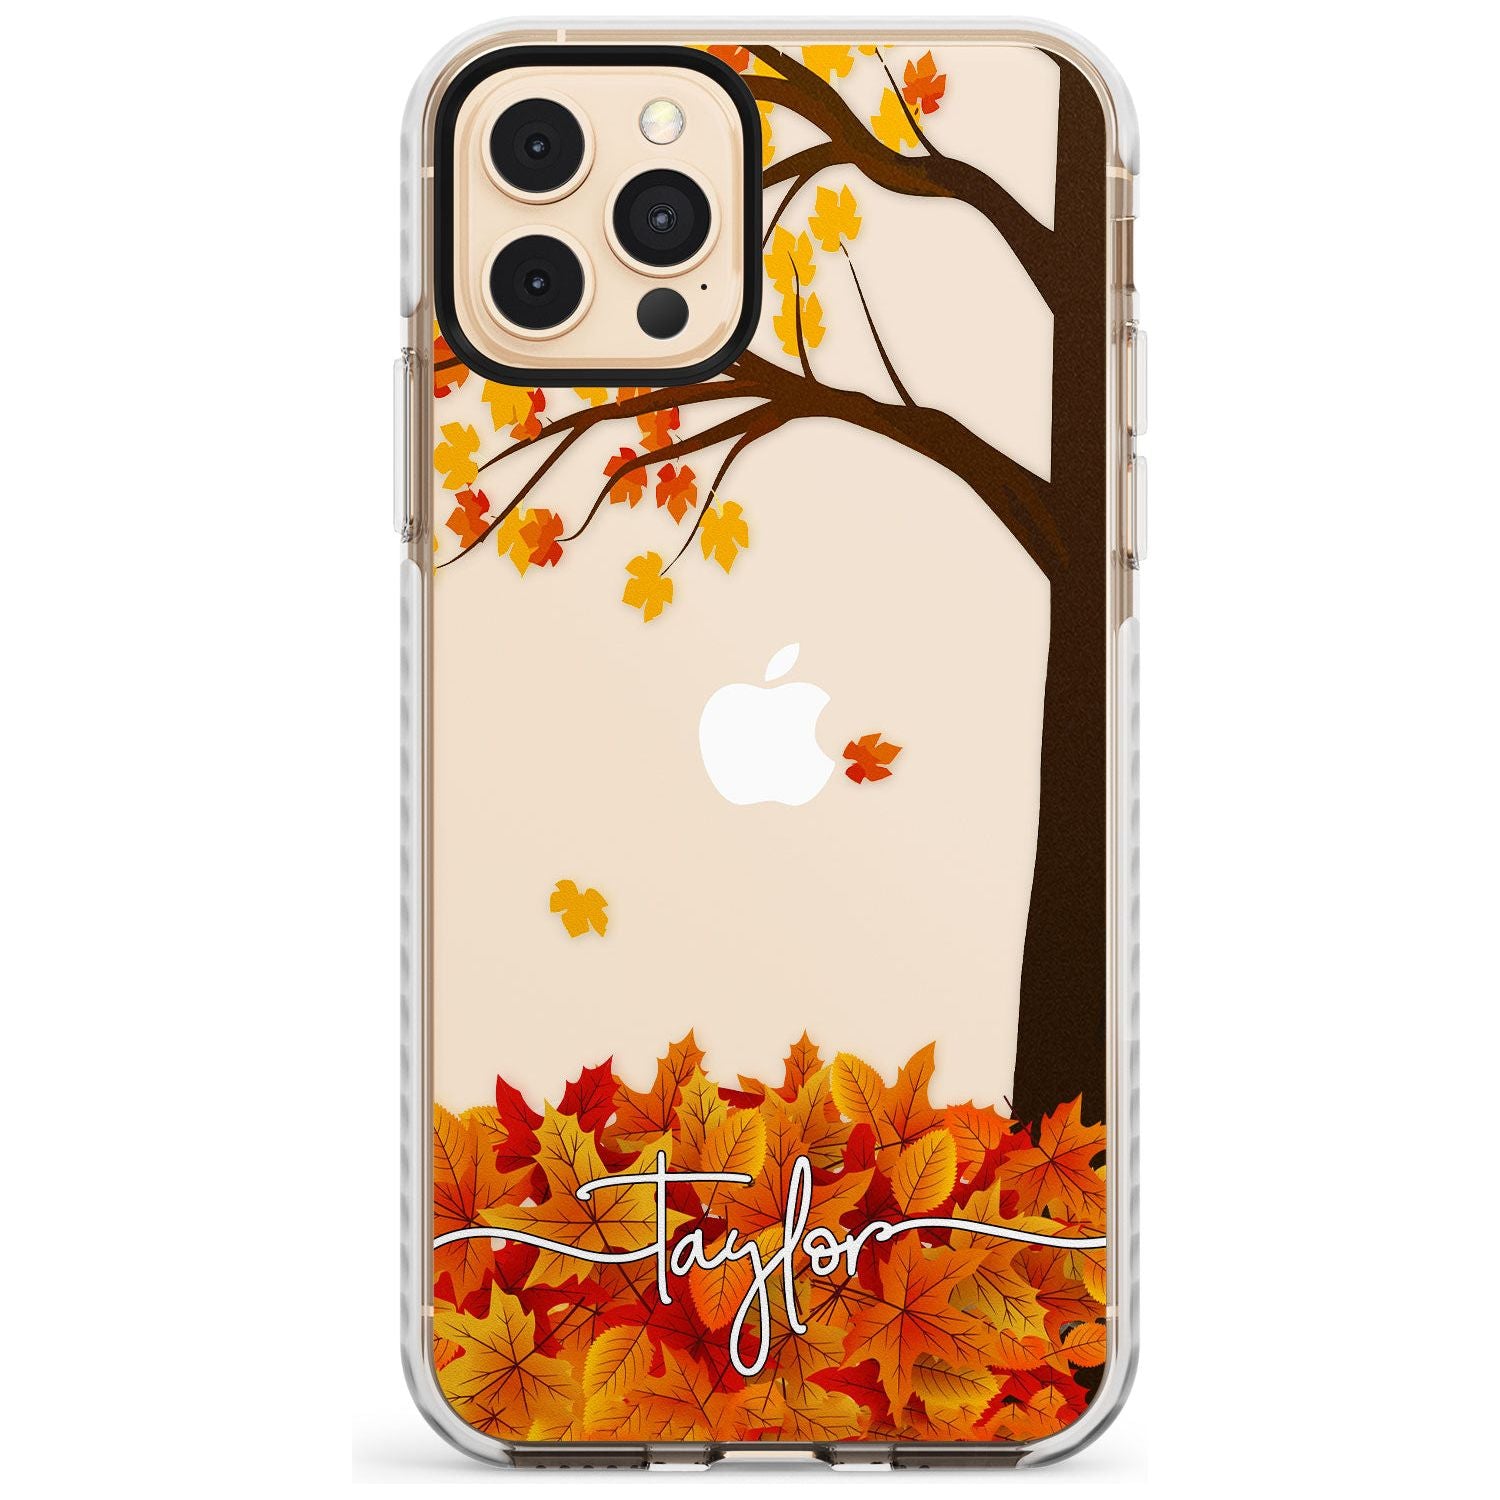 Personalised Autumn Leaves Impact Phone Case for iPhone 11 Pro Max